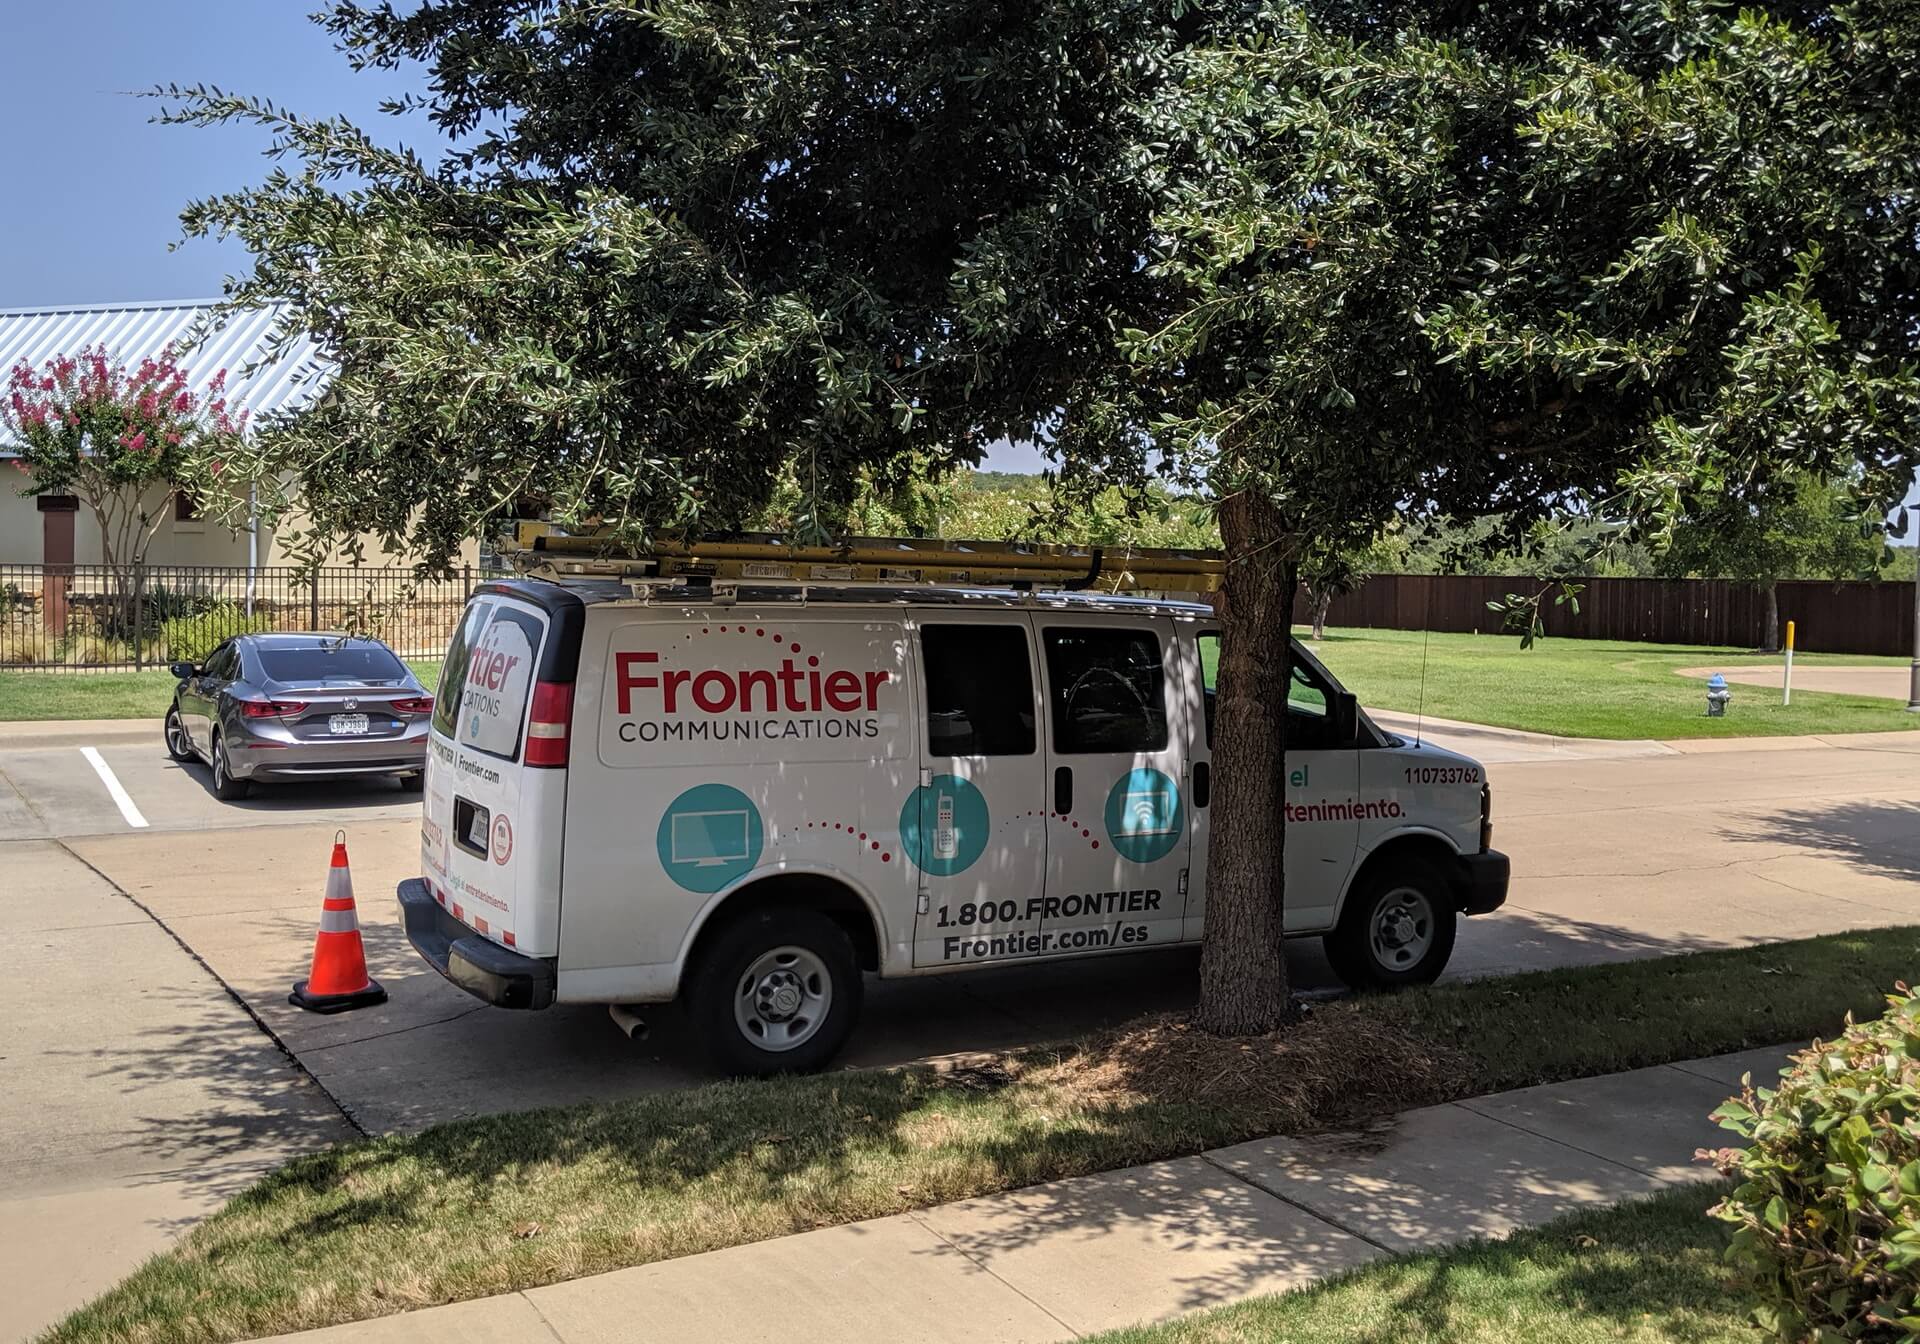 Frontier Communications van parked on the street in front of my house